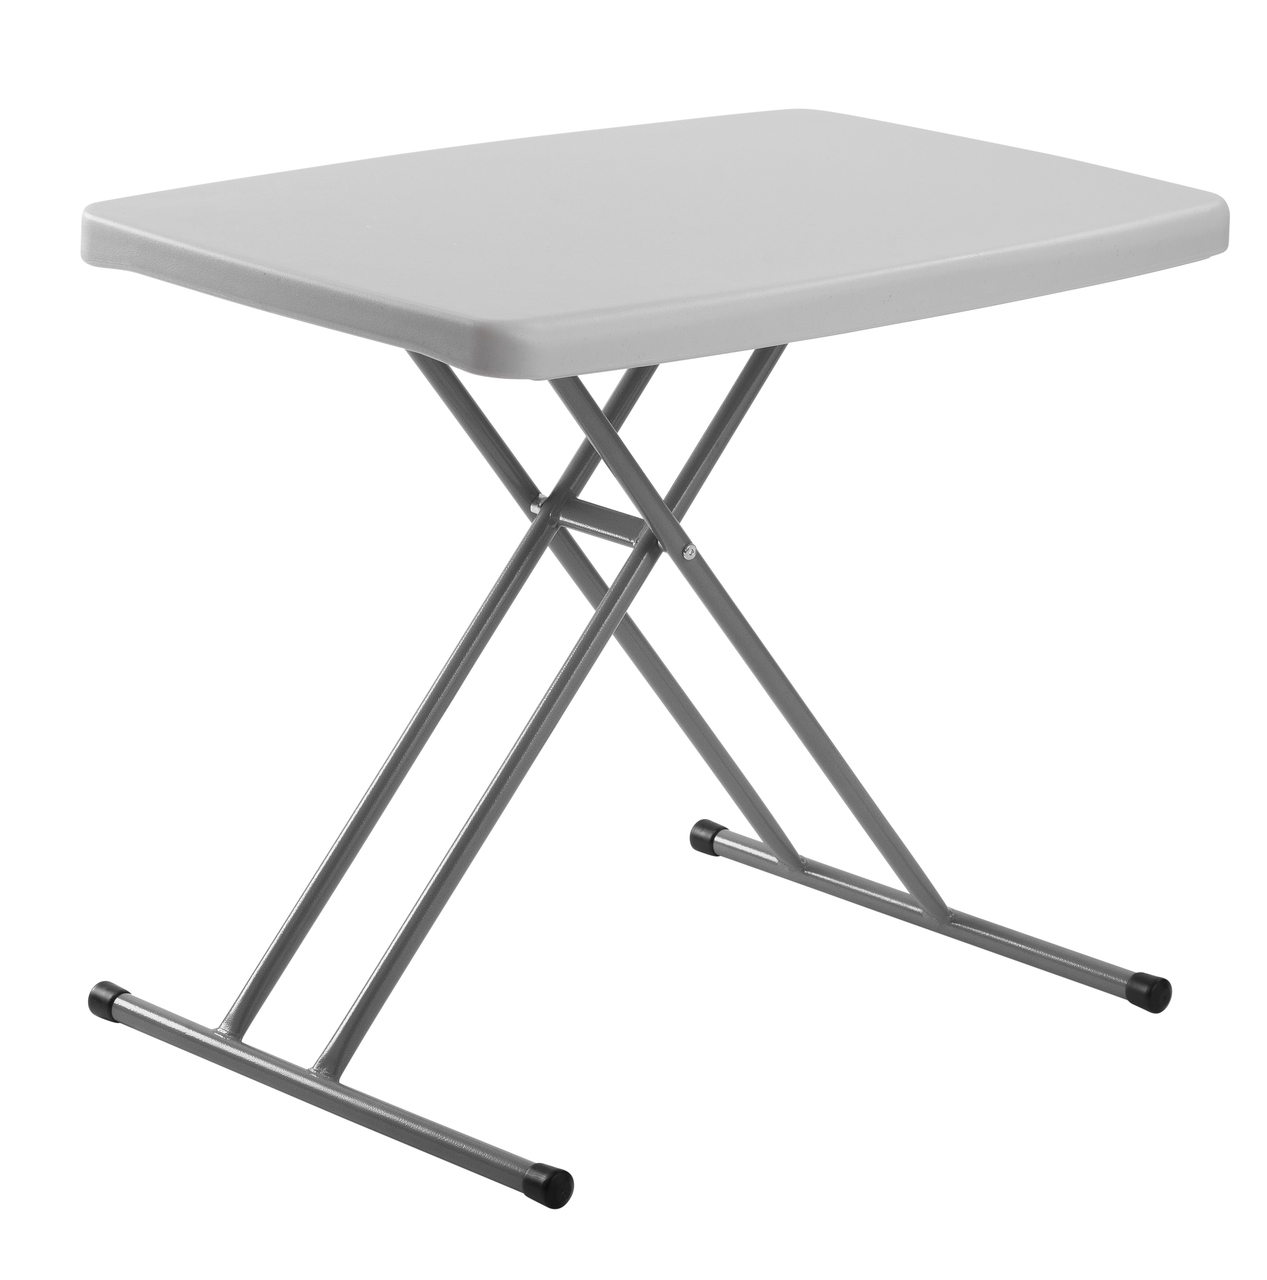 Commercialine 30" x 20" Personal Table - Speckled Grey Seat and Grey Frame